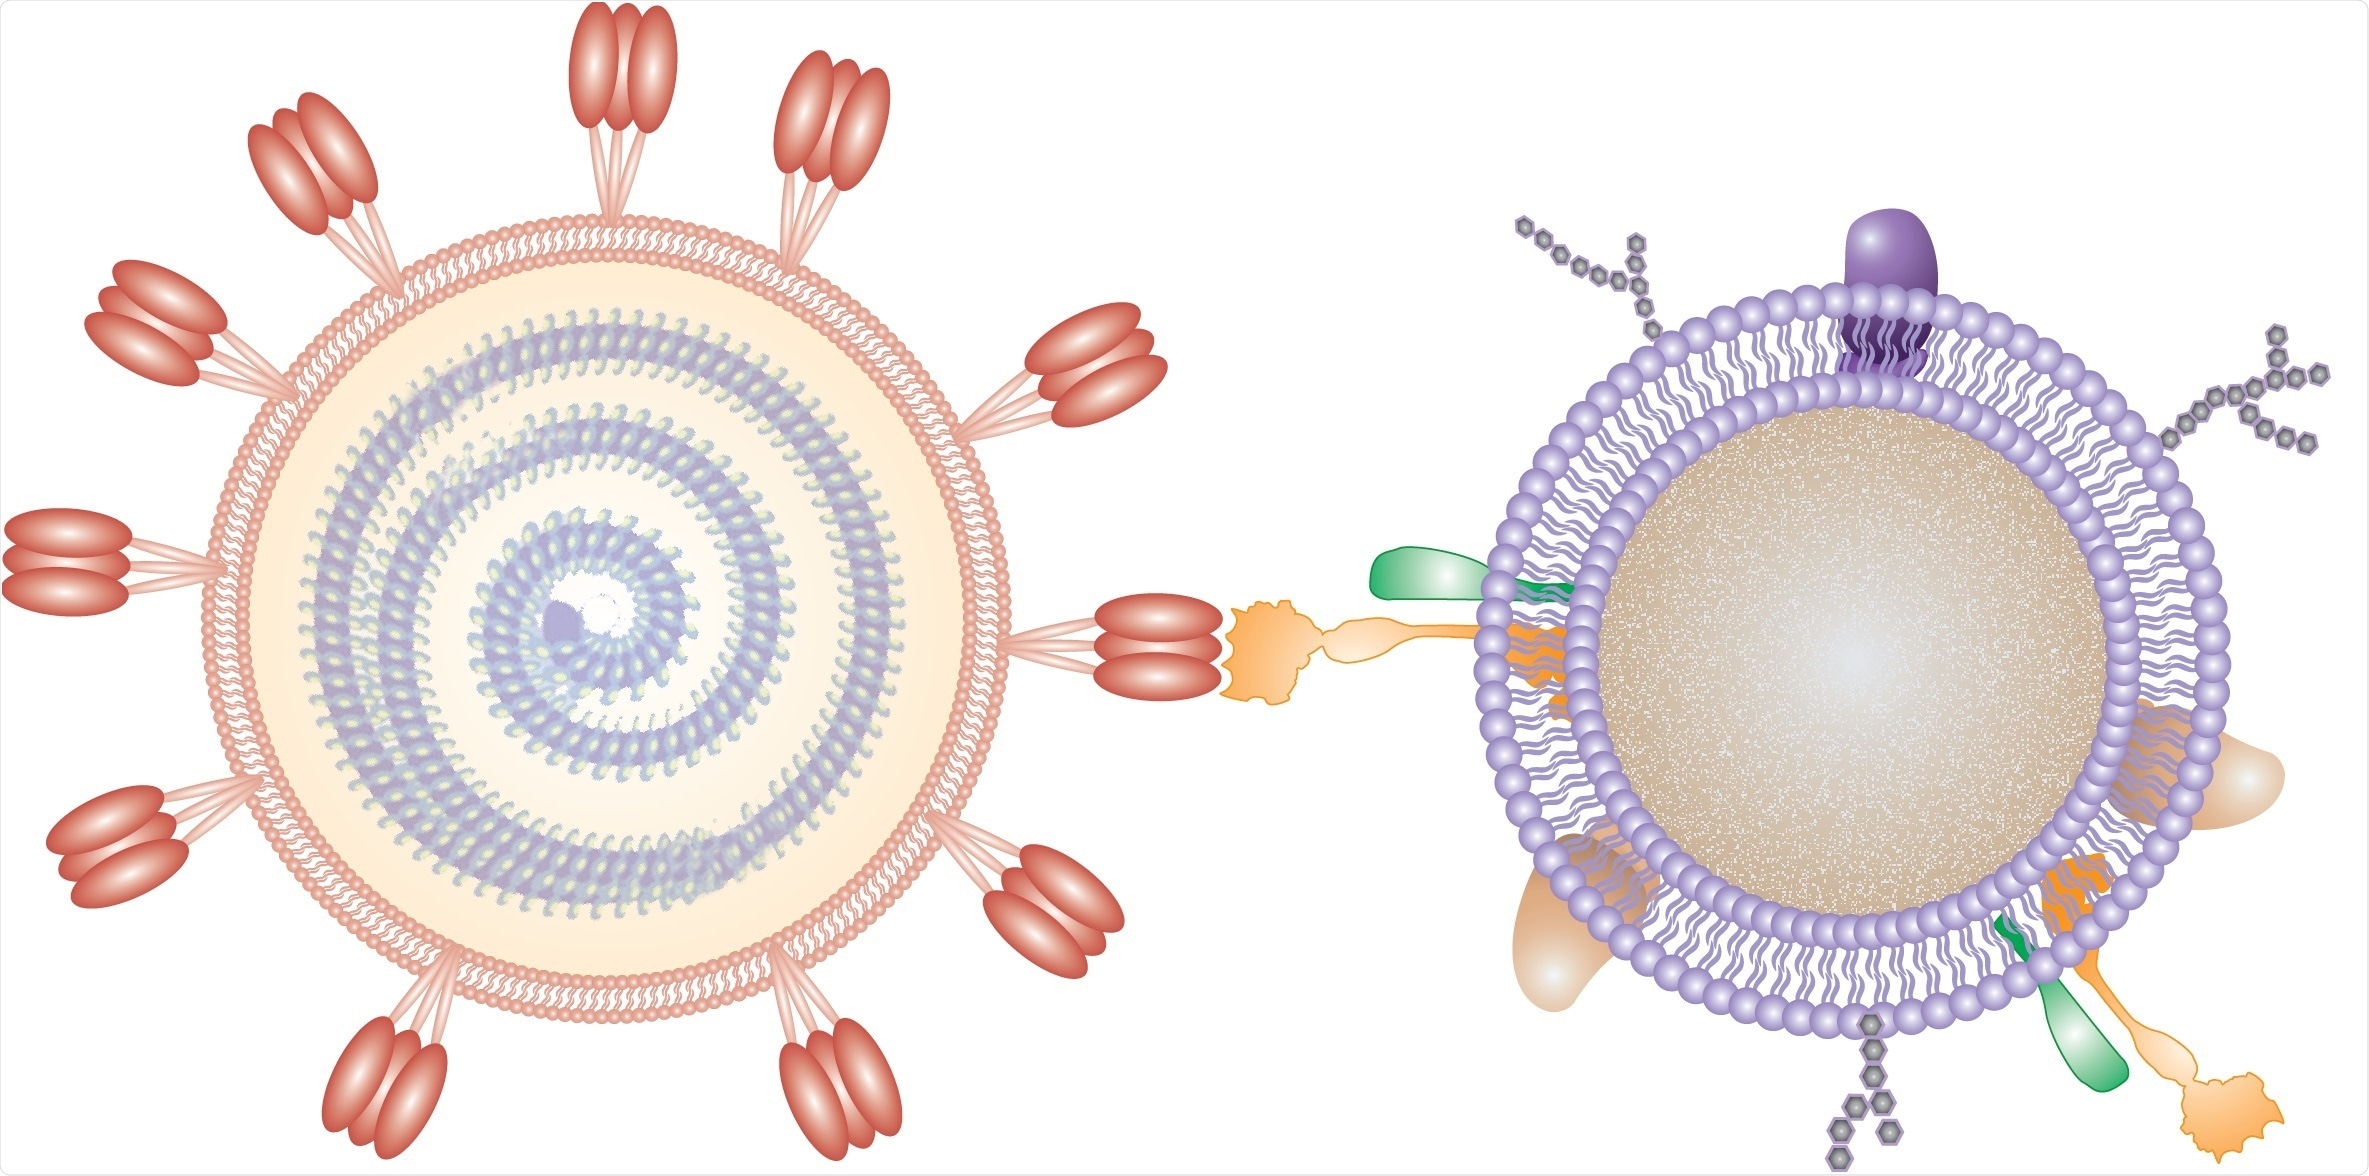 In this illustration, a nanosponge coated with a human cell membrane acts as a decoy to prevent a virus from entering cells. Credit: Adapted from Nano Letters 2020, DOI: 10.1021/acs.nanolett.0c02278